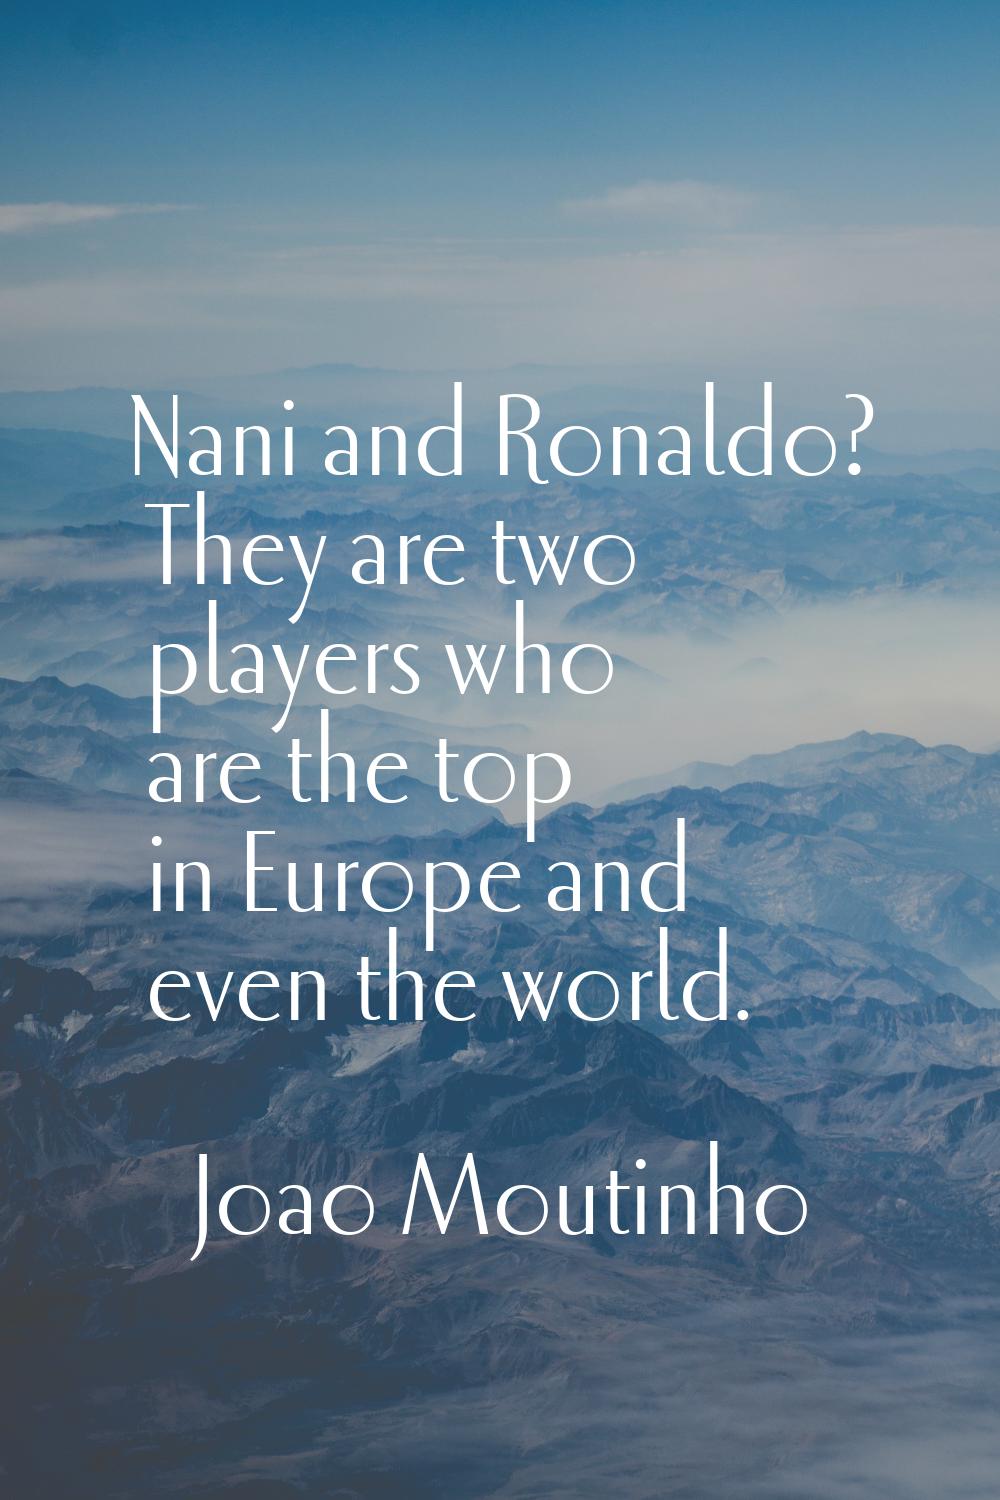 Nani and Ronaldo? They are two players who are the top in Europe and even the world.